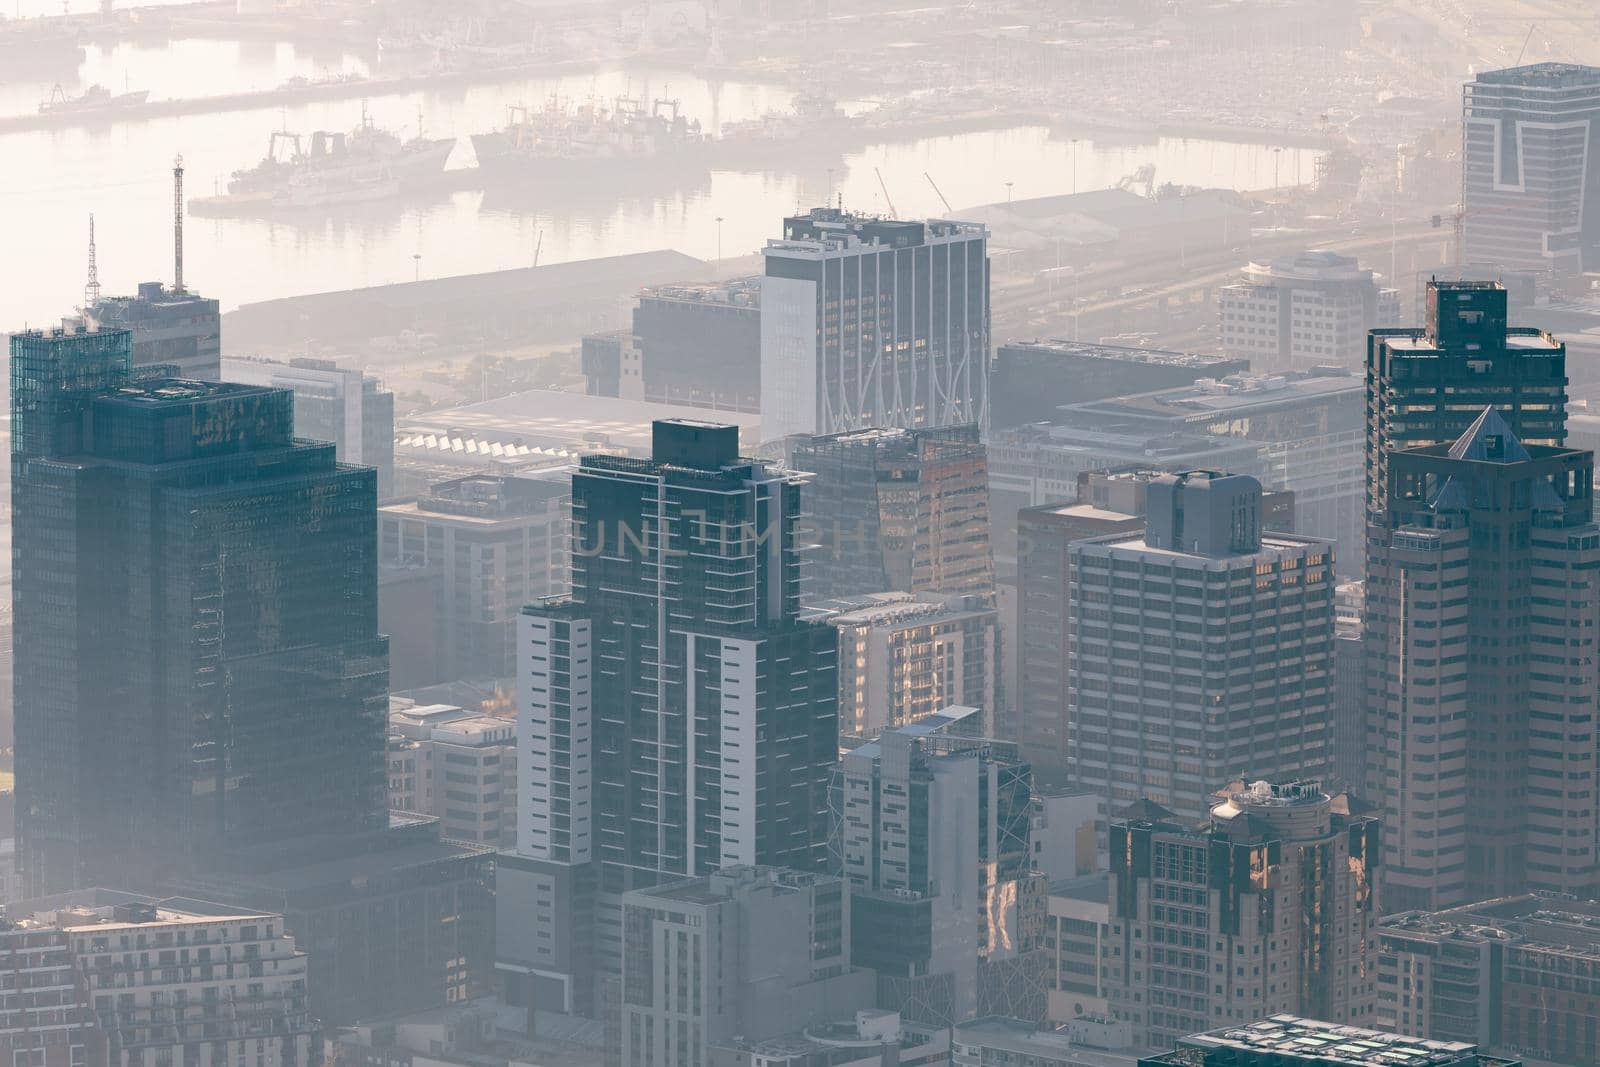 General view of cityscape with multiple modern buildings and skyscrapers in the foggy morning. skyline and urban architecture.